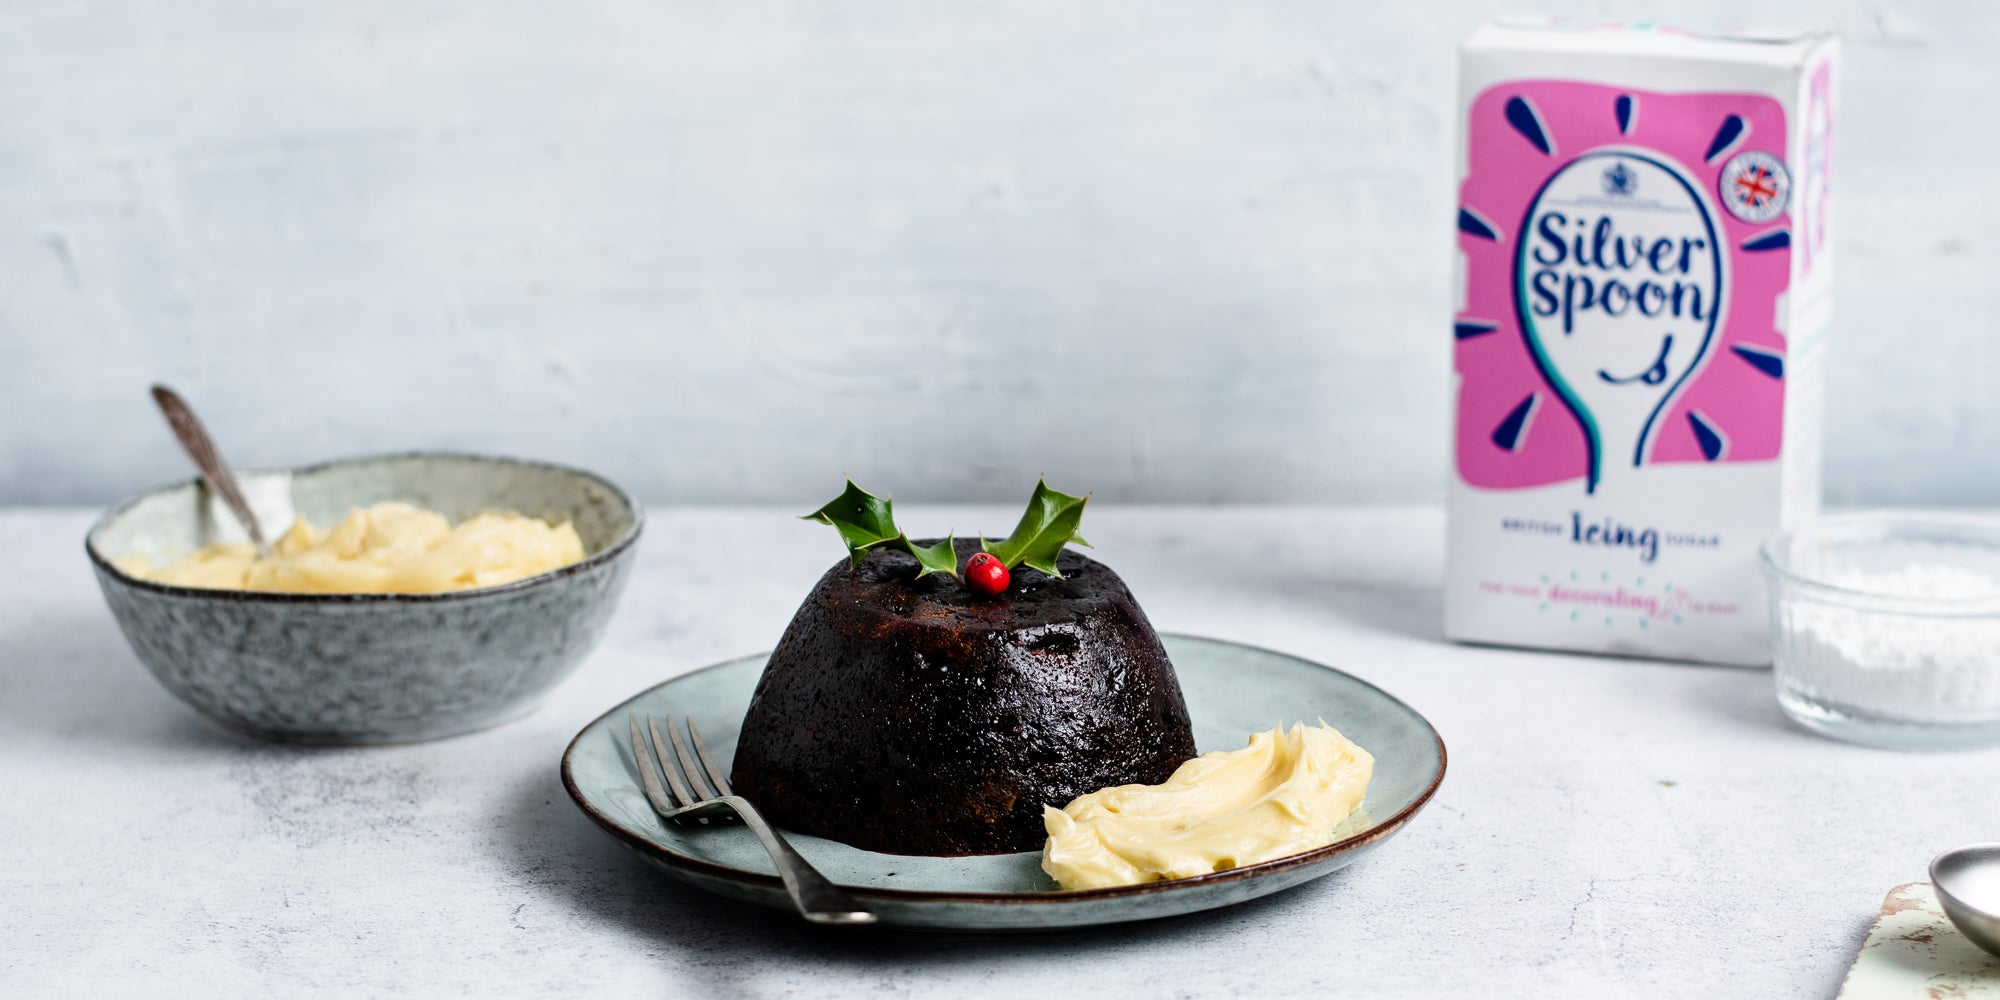 Close up of christmas pudding with a serving of Brandy butter, next to a box of Silver Spoon icing sugar 